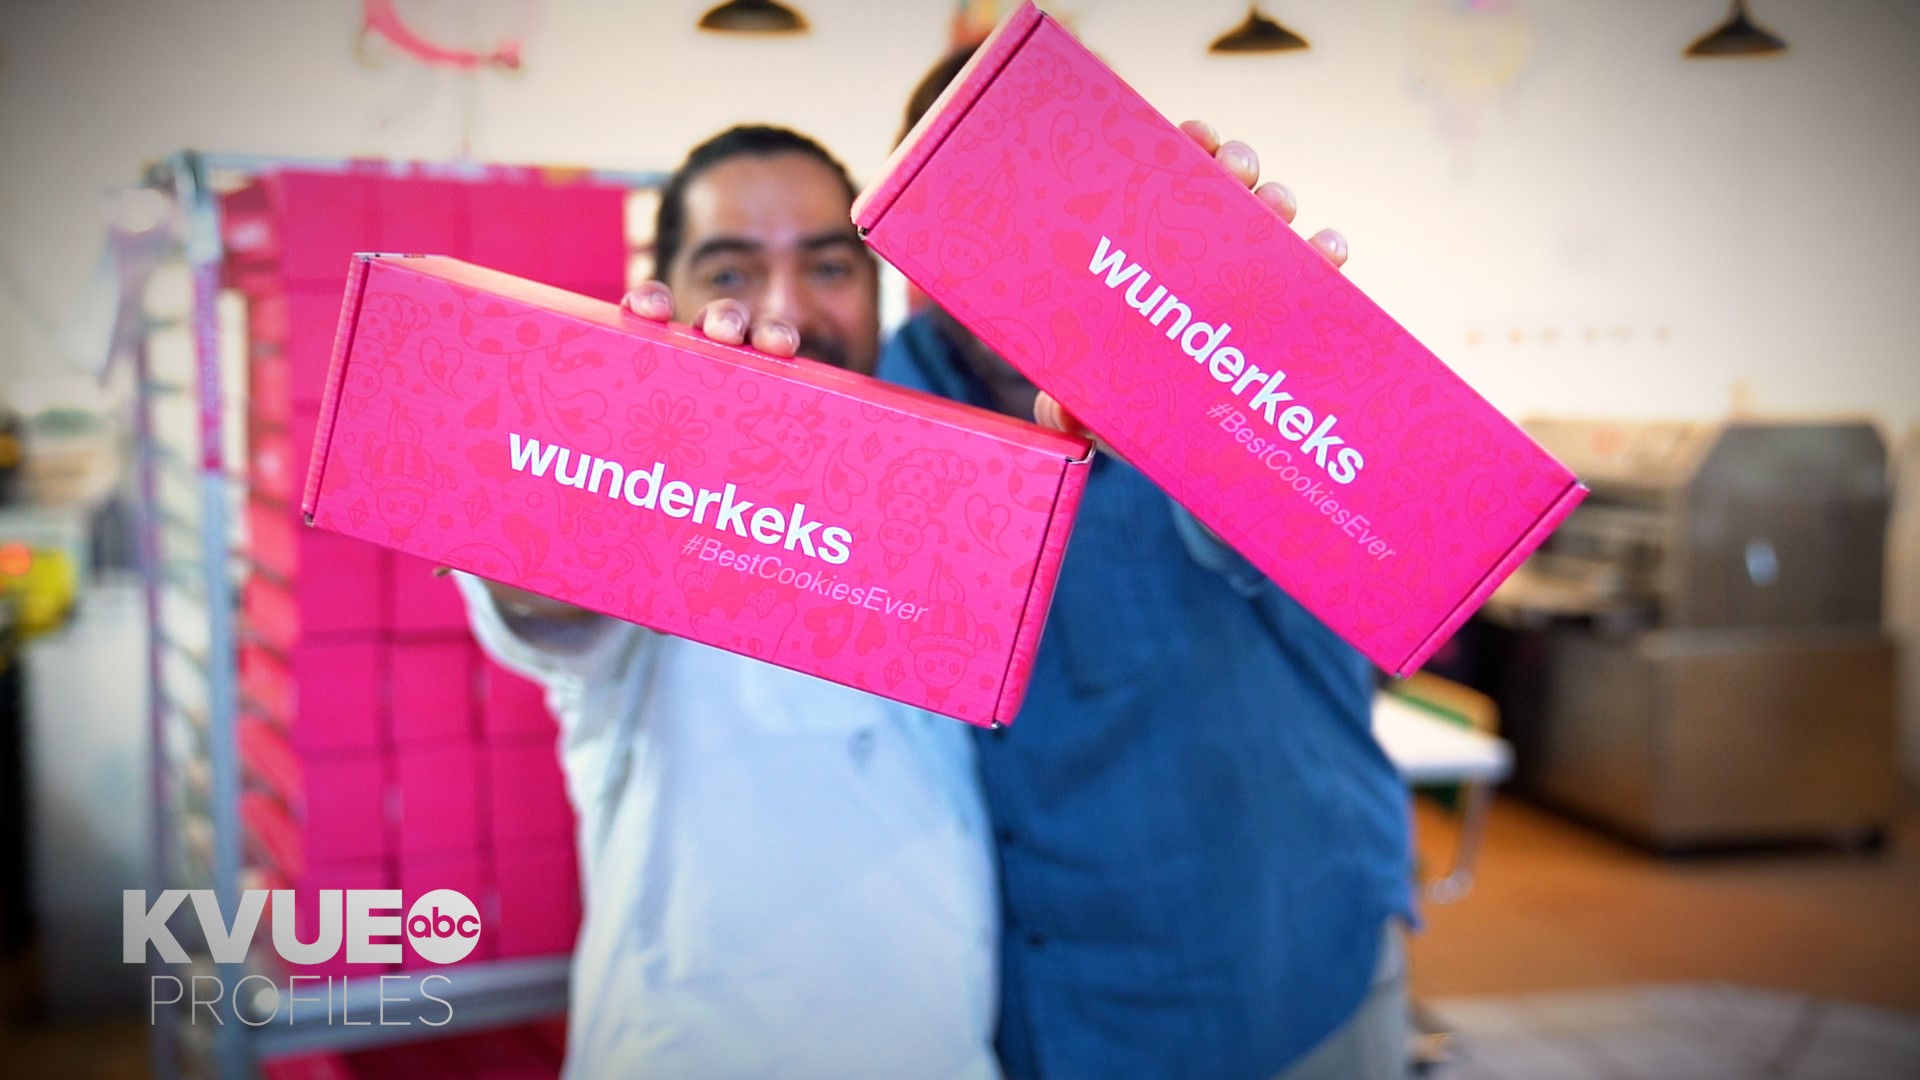 Wunderkeks is so much more than just a cookie business. It’s now a multi-million-dollar dessert empire building a safe space, one bite at a time.